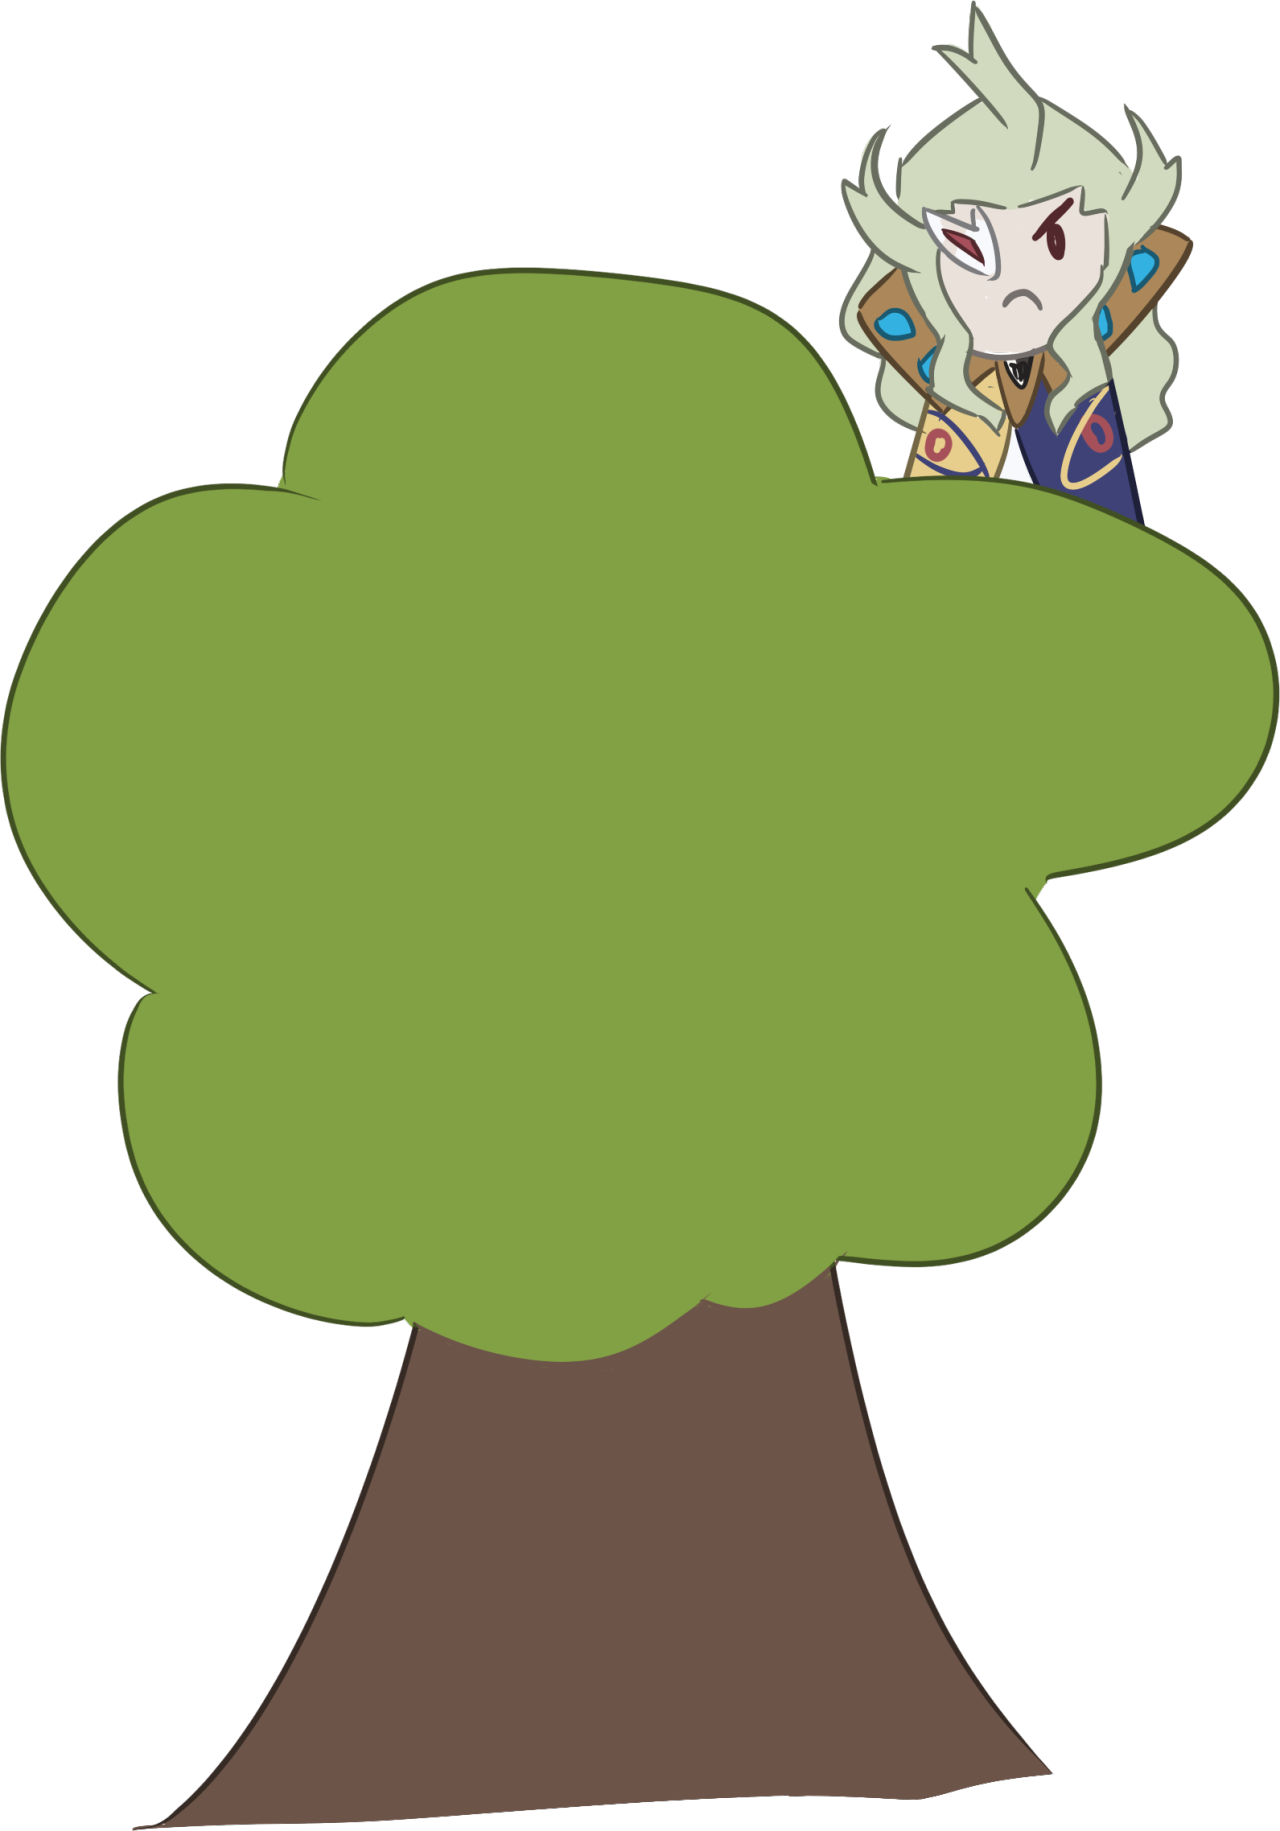 I have a very stupid animatic idea, however as I doubt my artistic abilities, I shall draw Ghetsis in a tree in as little time as possible instead. #pokemon#pokemon bw#pokemon bw2 #i drew this  #why did i drew this? #not sure #ive just suddenly decided i wanna make more low effort bw garbage